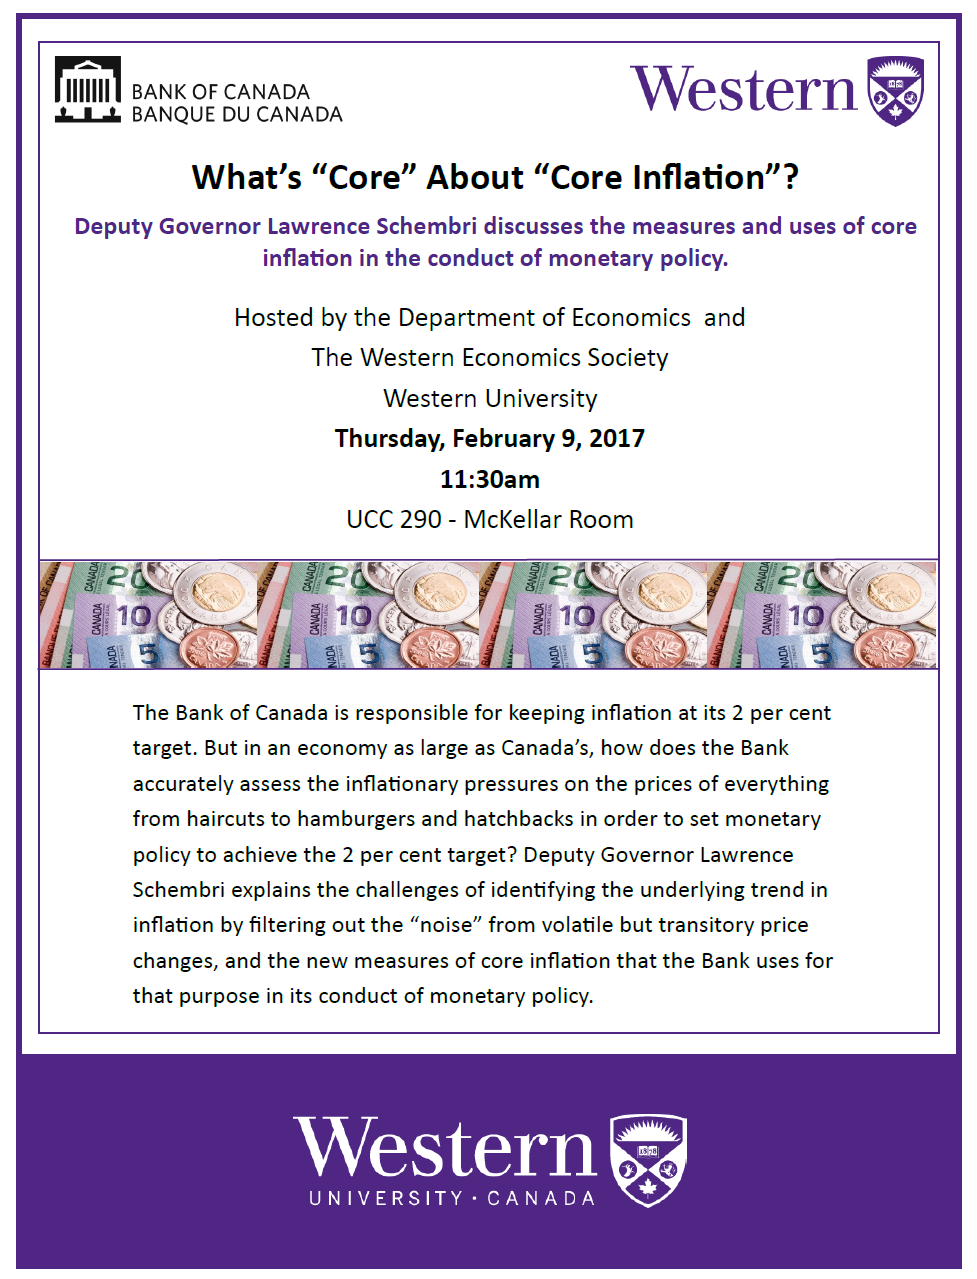 What's core about core inflation? poster